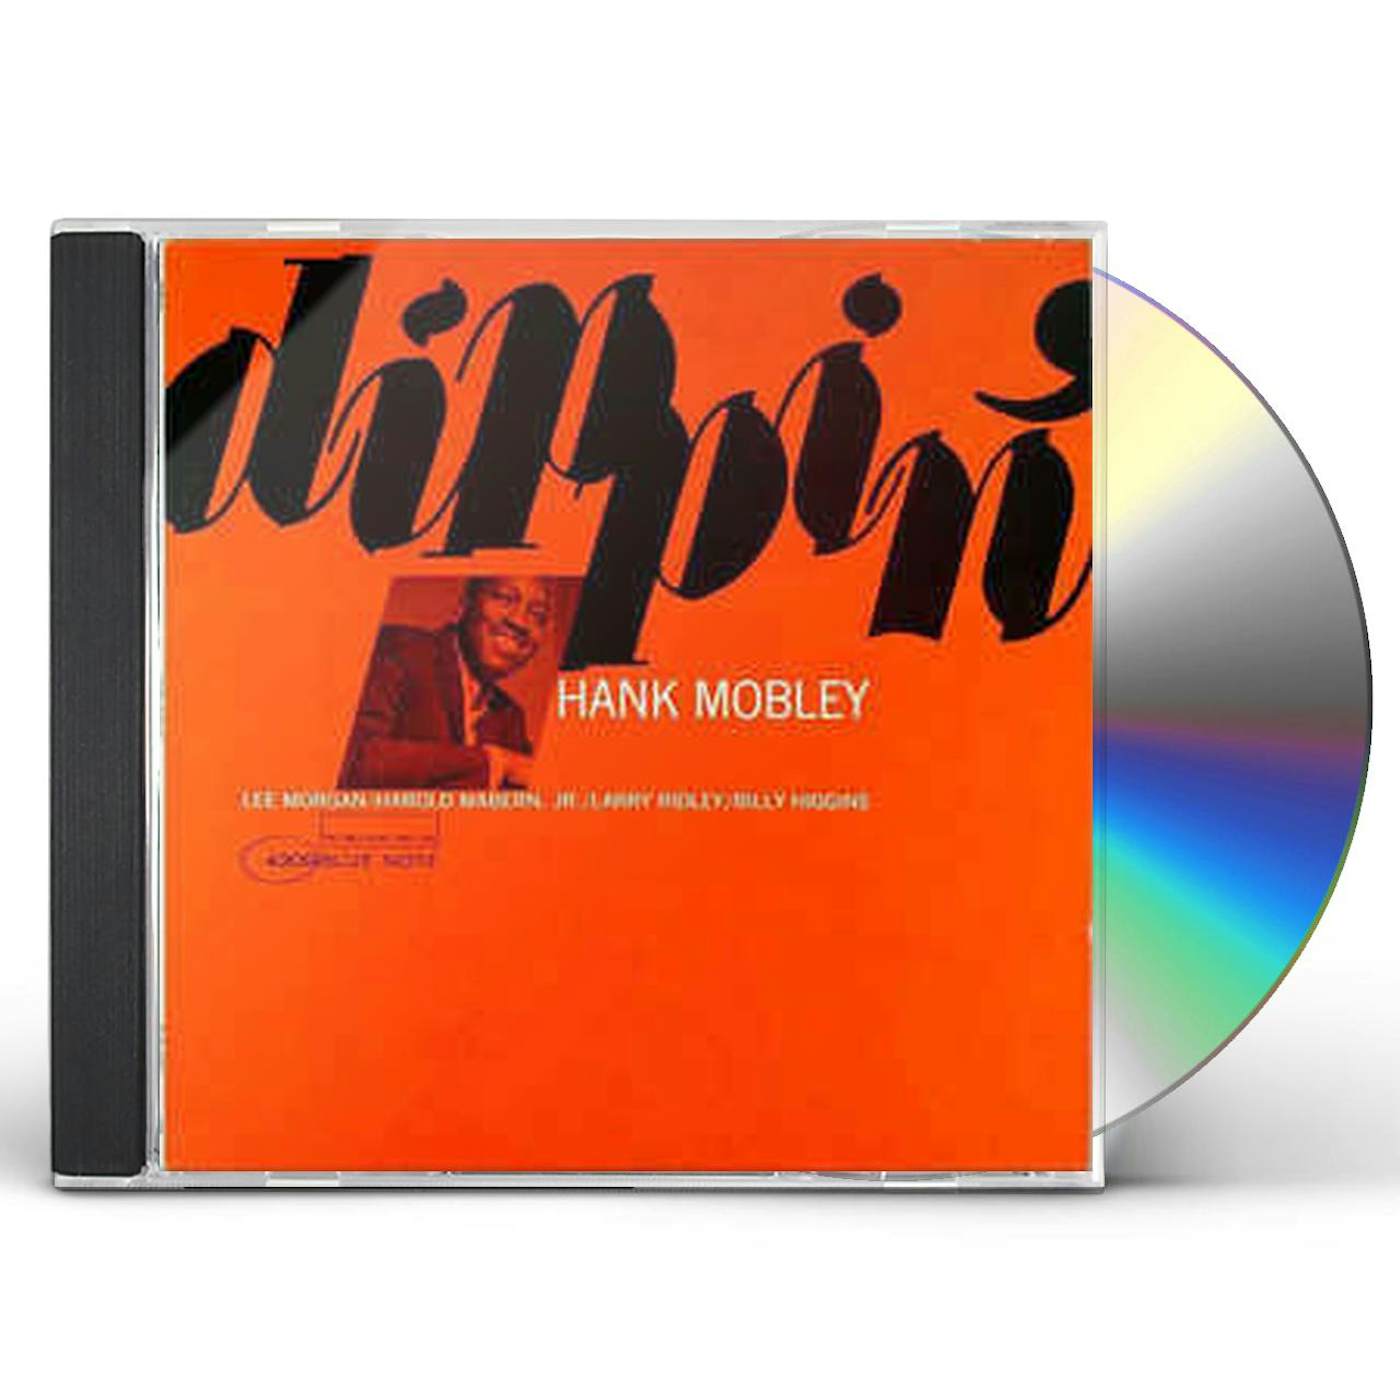 Hank Mobley DIPPIN (SHM/REMASTERED/REISSUE) CD